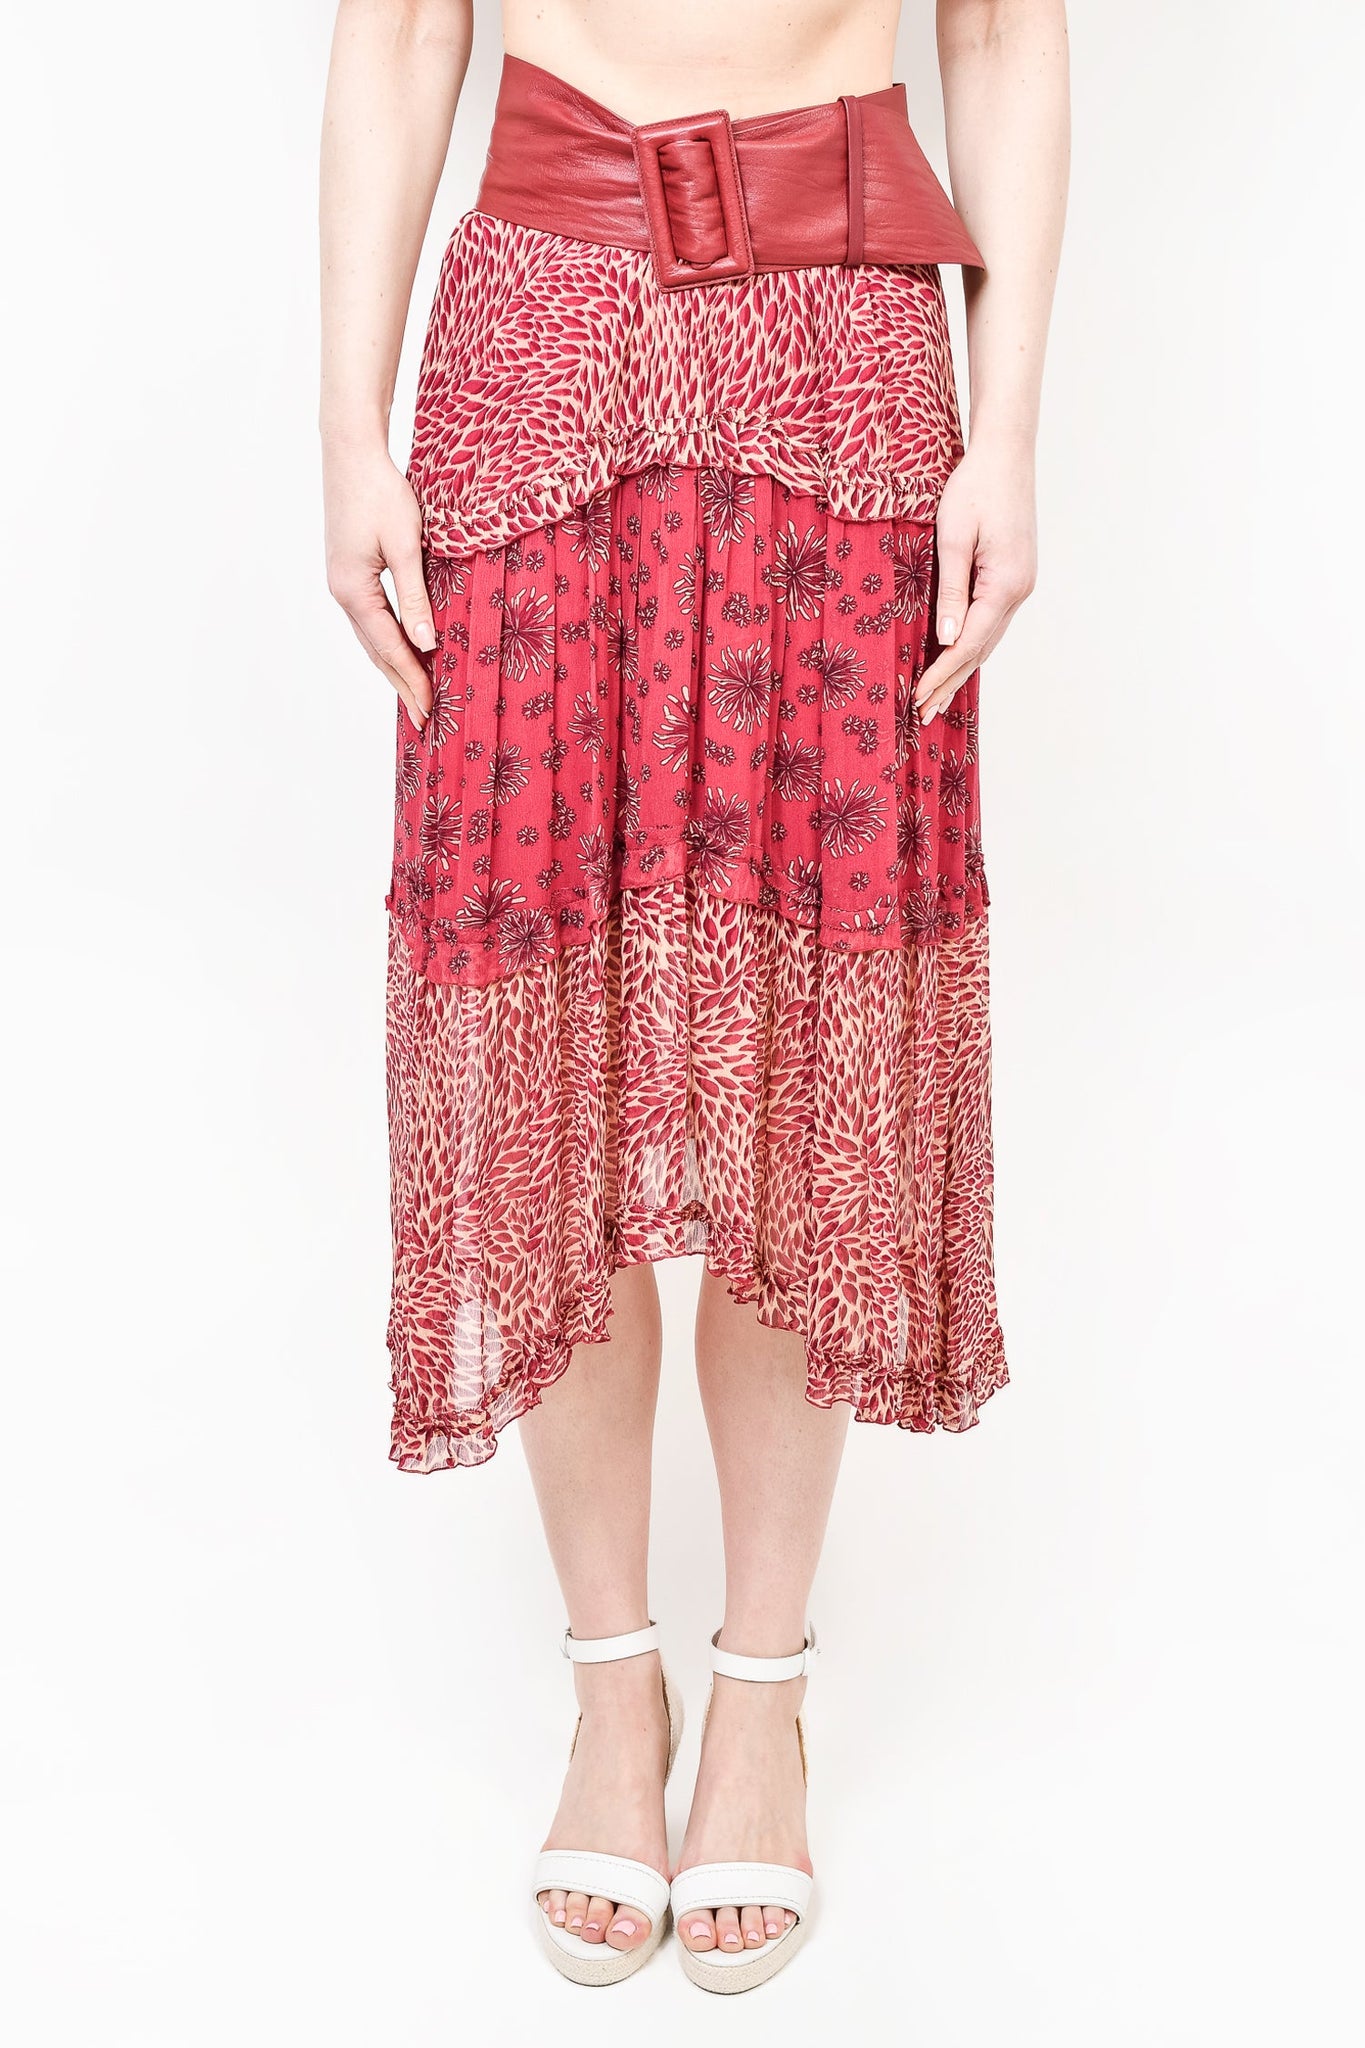 Ba&sh Red Printed Midi Skirt with Burgundy Leather Belt Size S